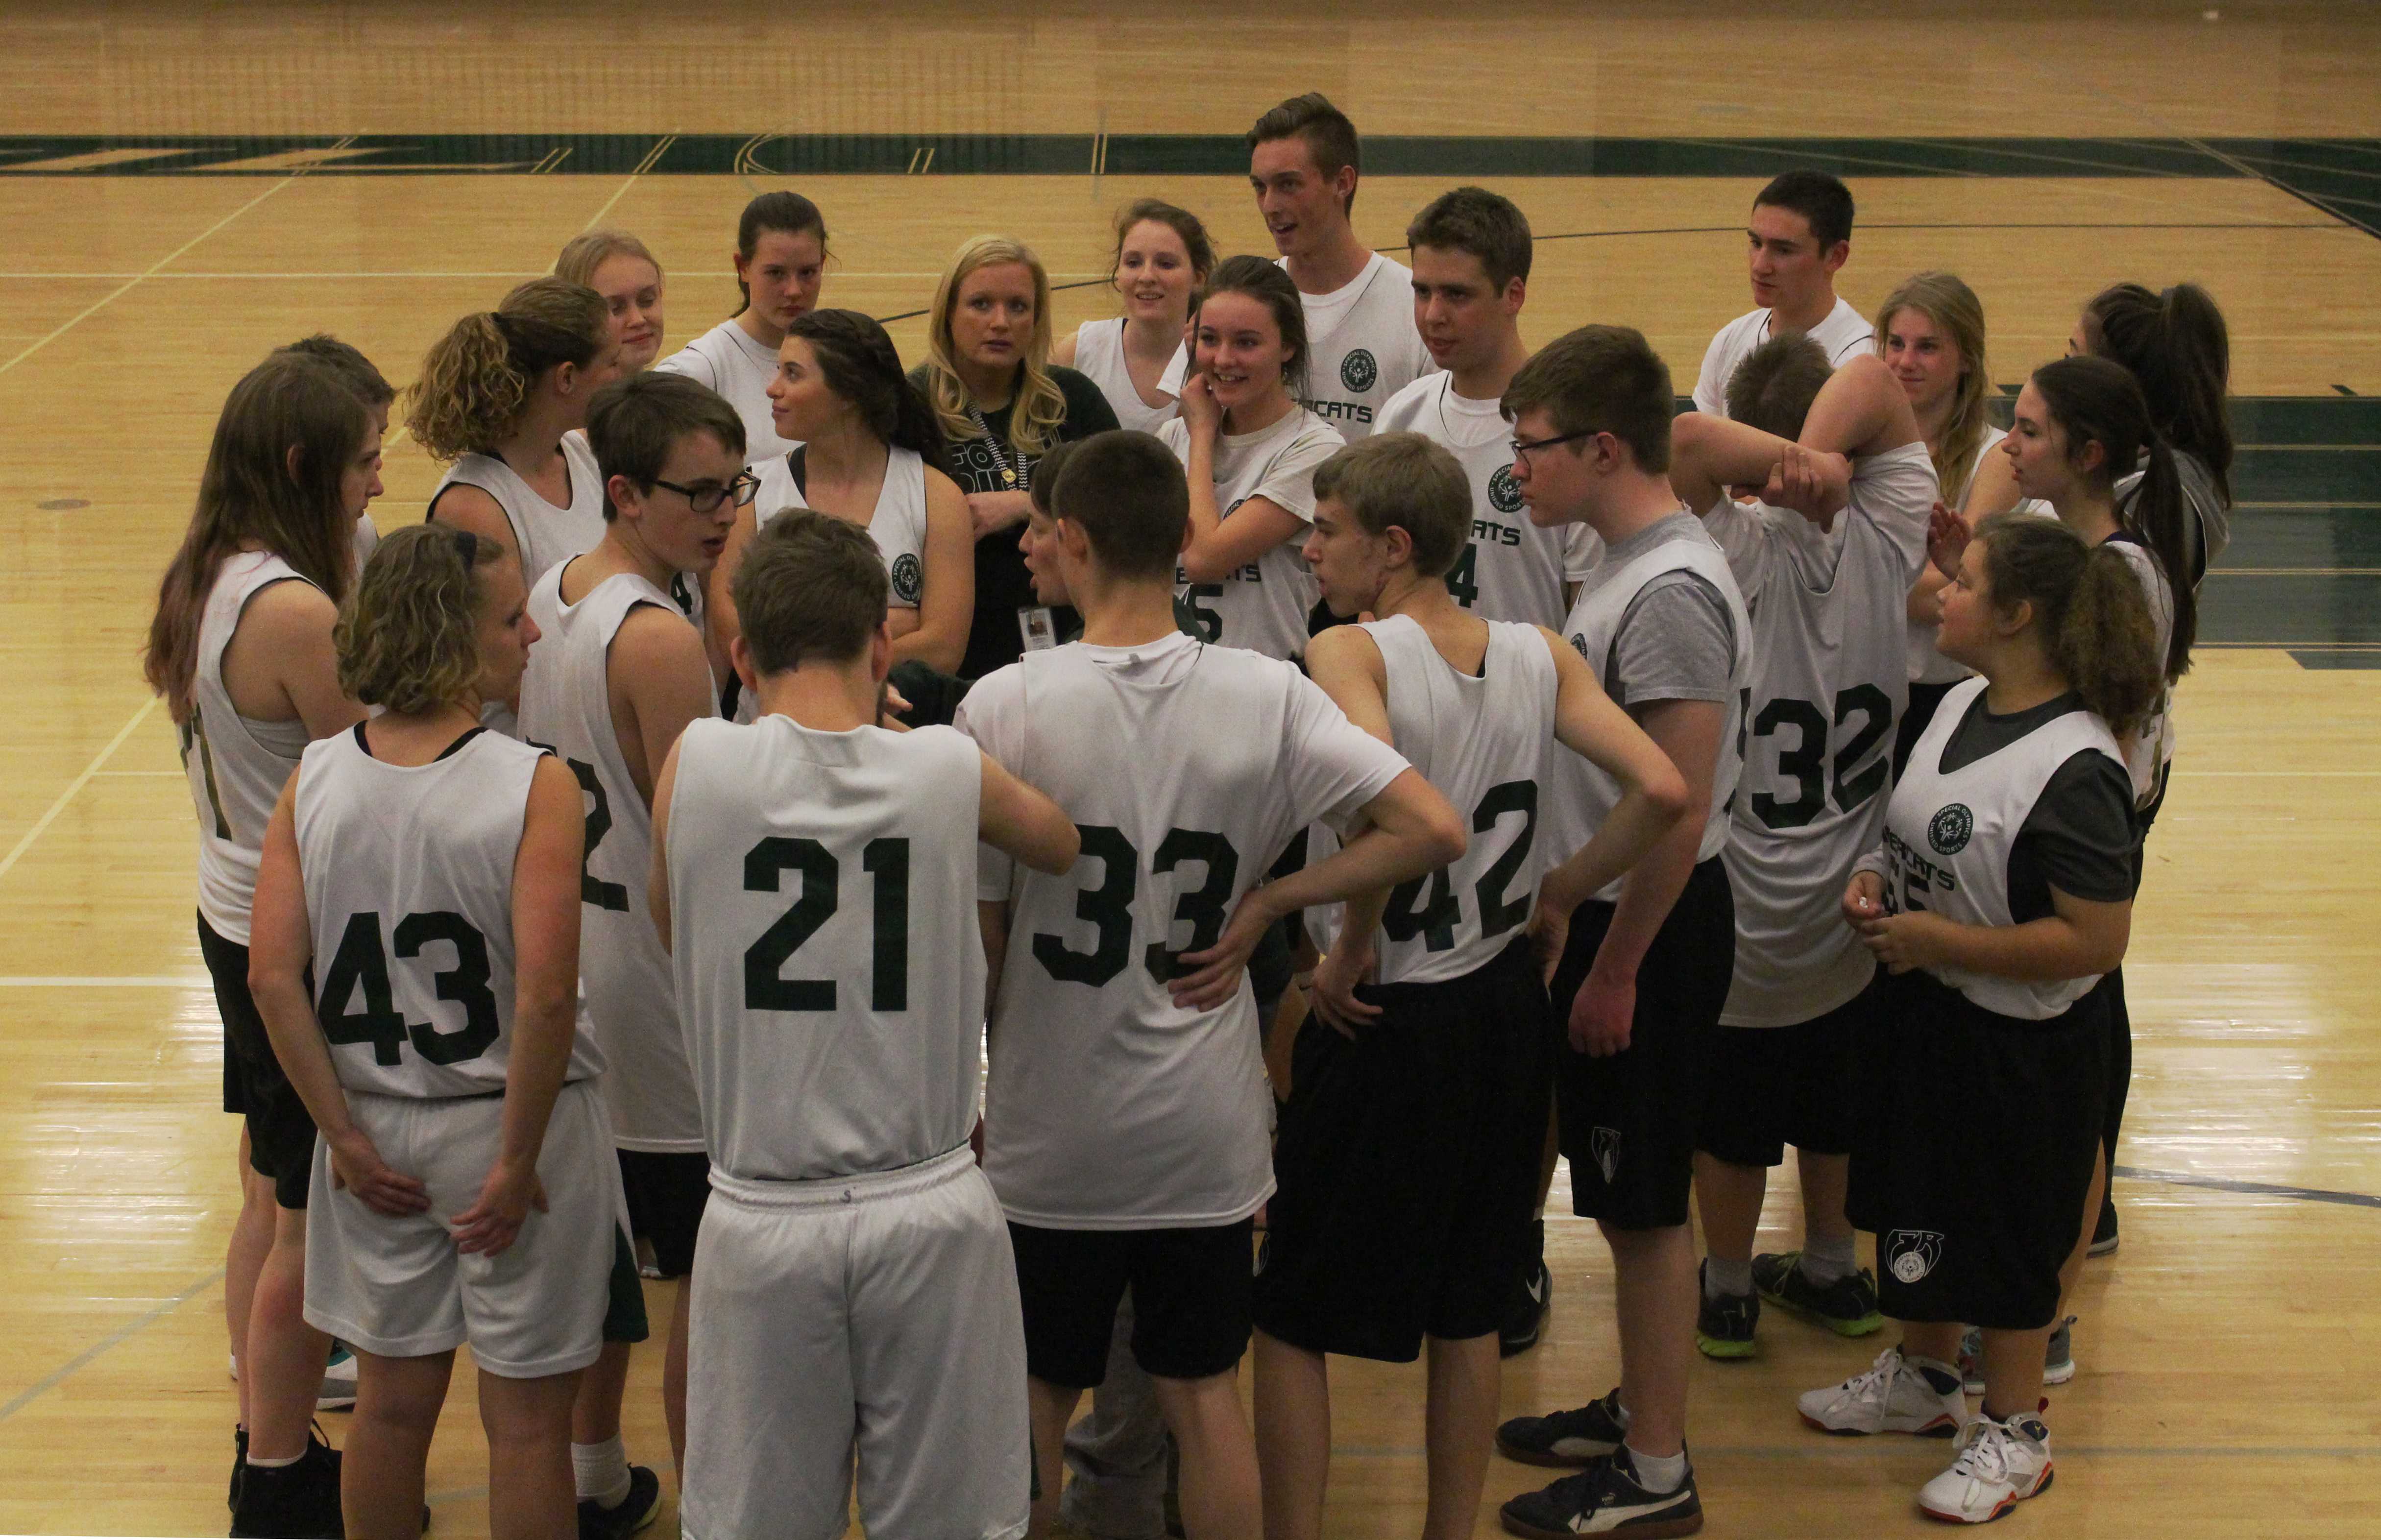 The team gathers for a Sabercat chat. Photo Credit: Karen Manley